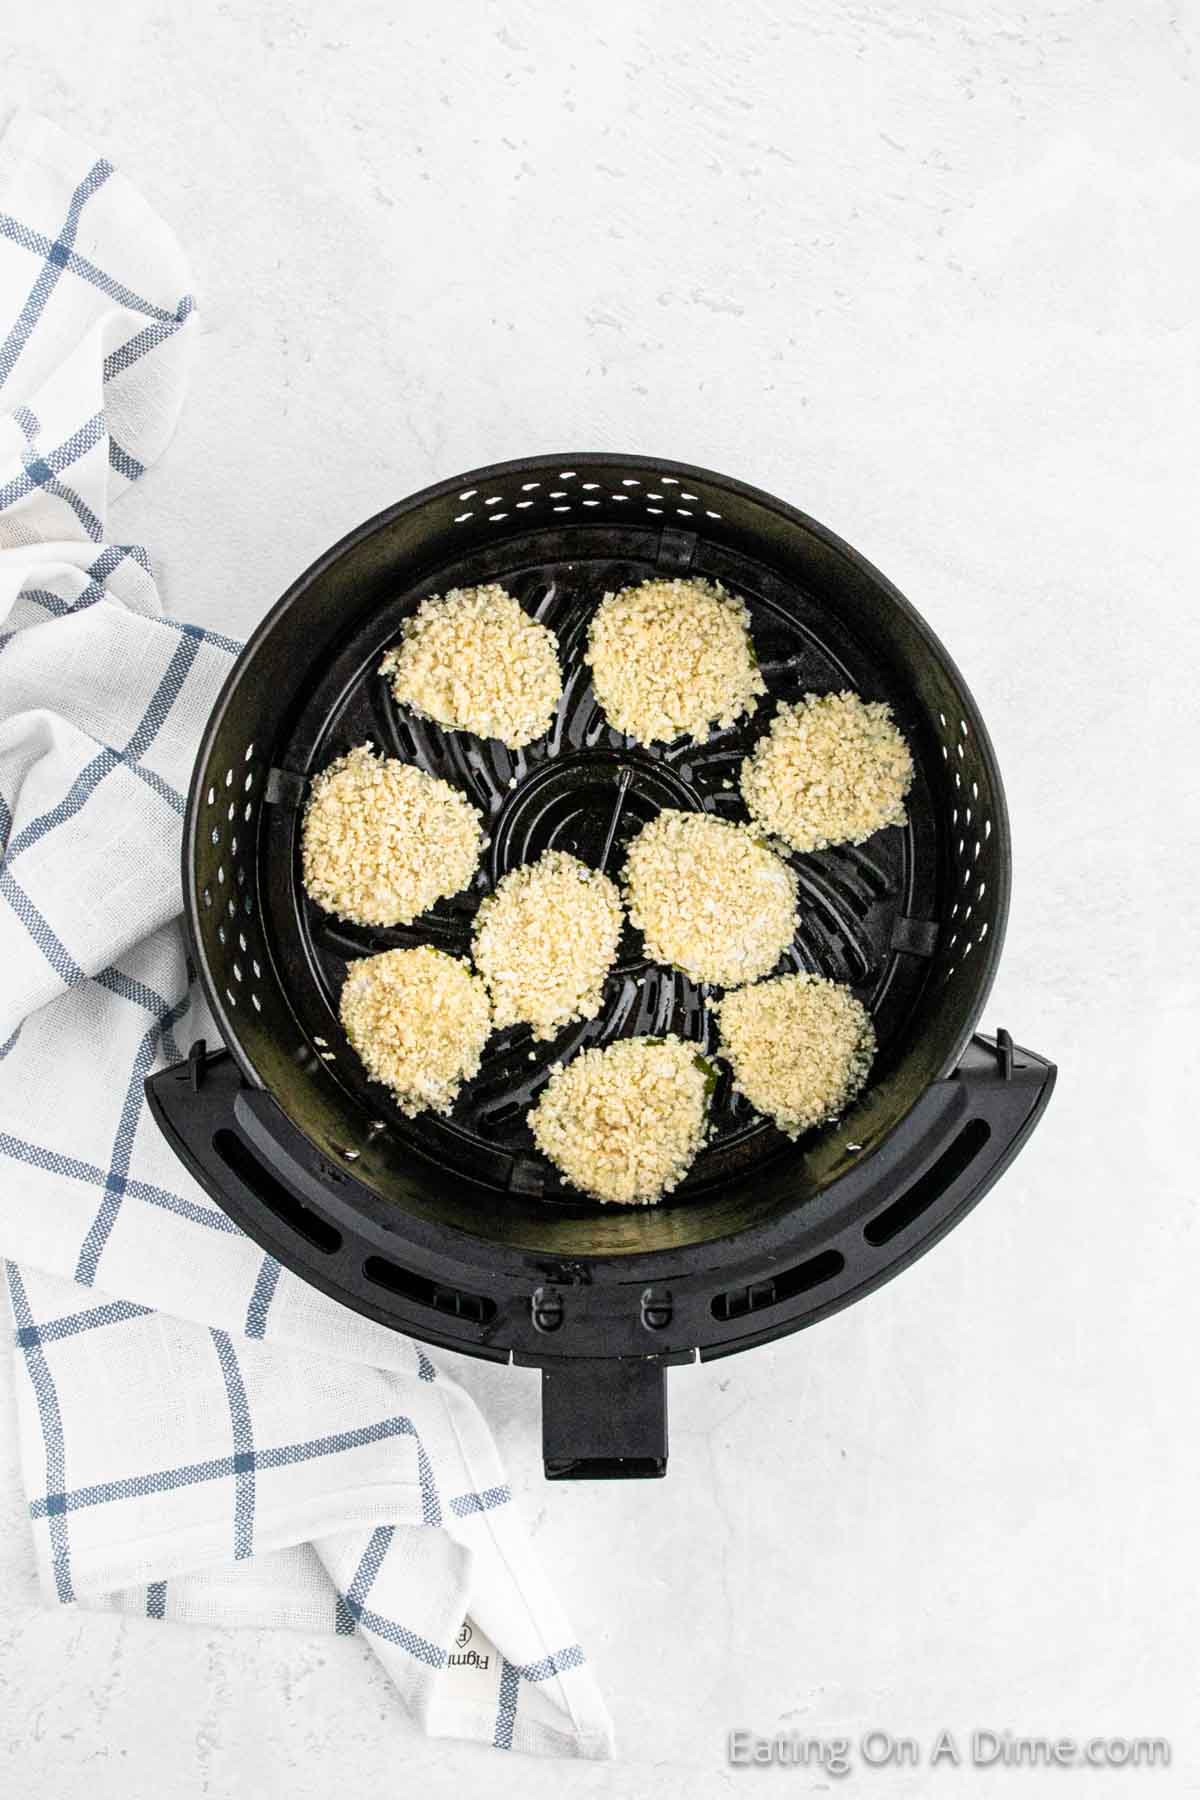 Placing the breaded pickles in the air fryer basket